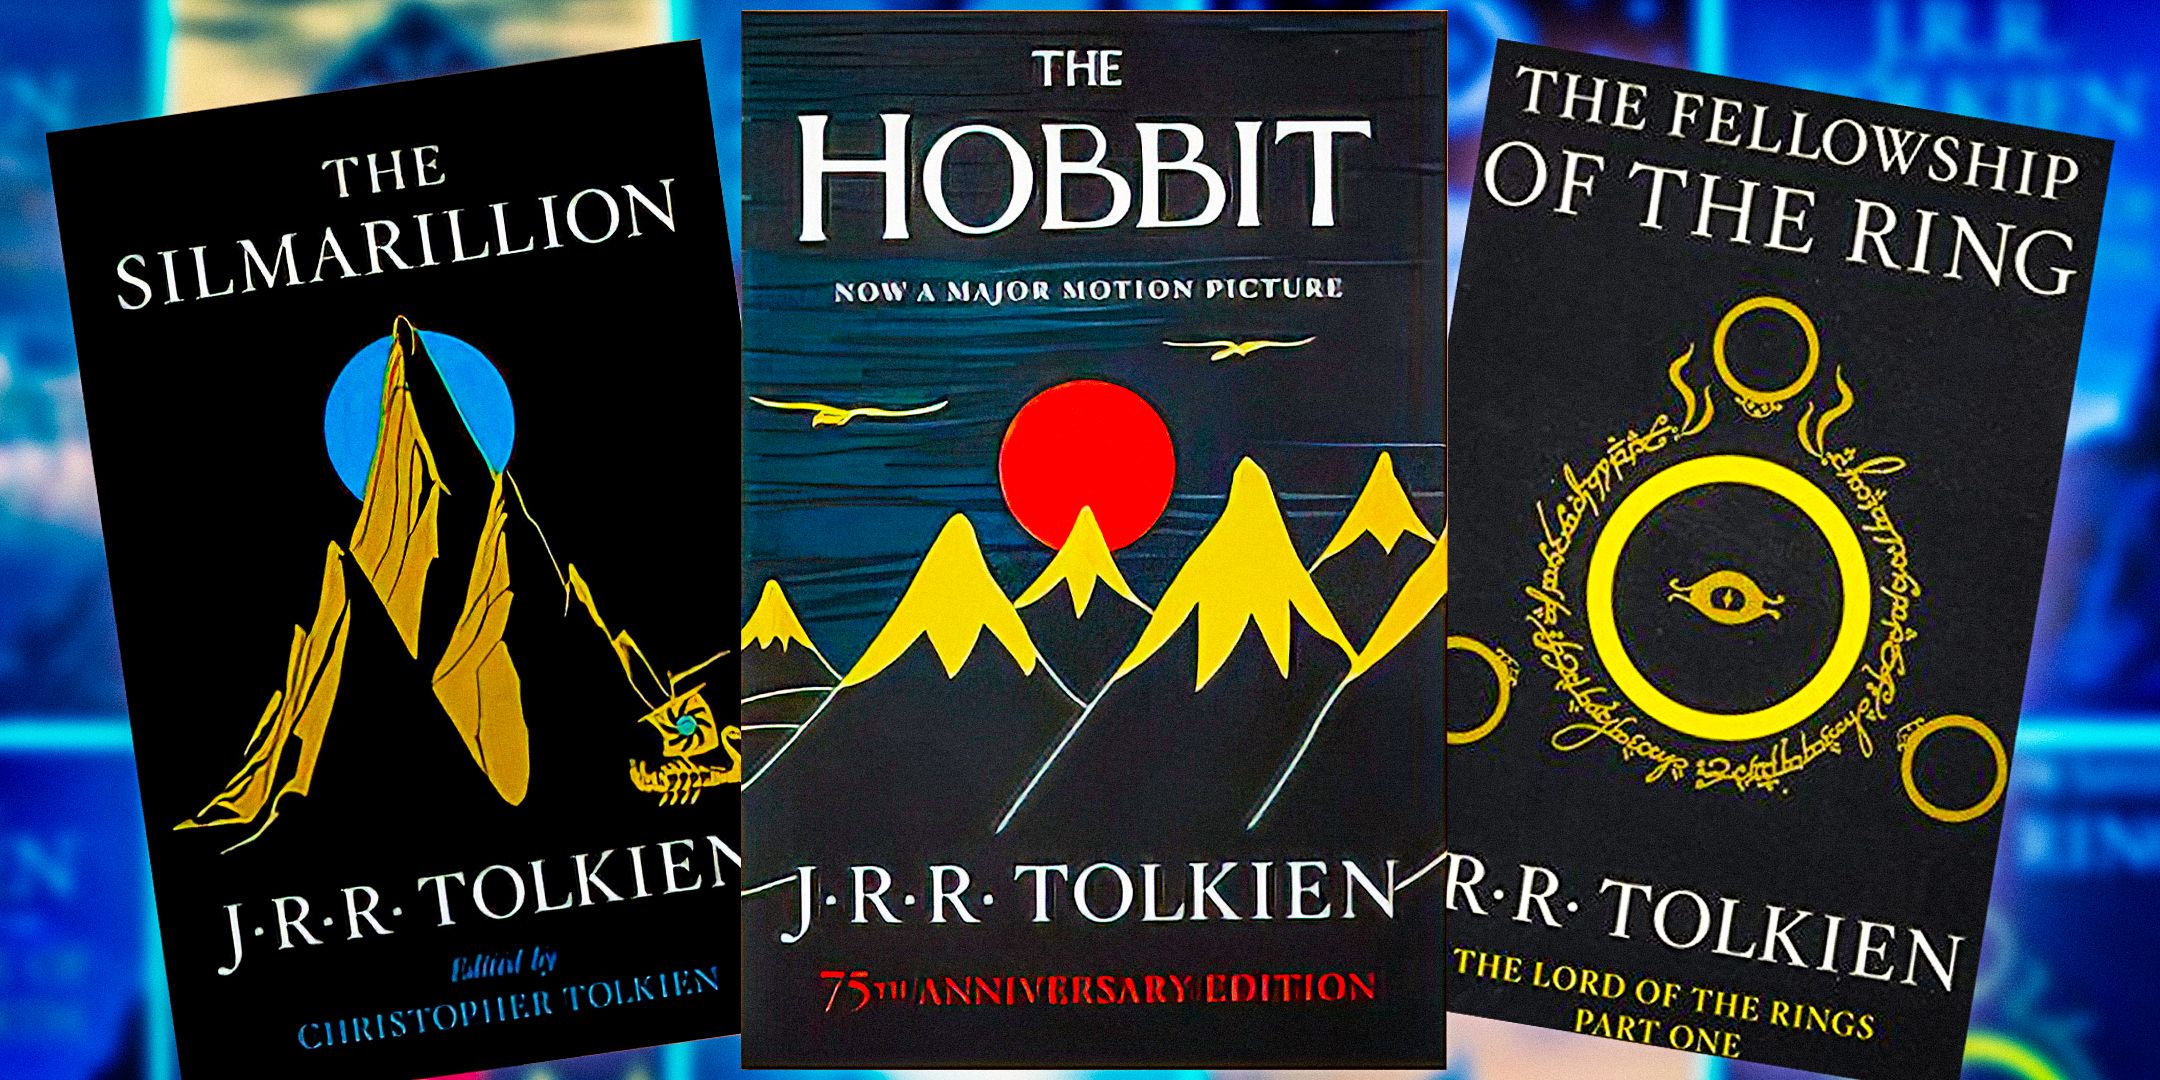 How To Read J.R.R. Tolkien's Lord Of The Rings Books In Order: Chronological & Release Date